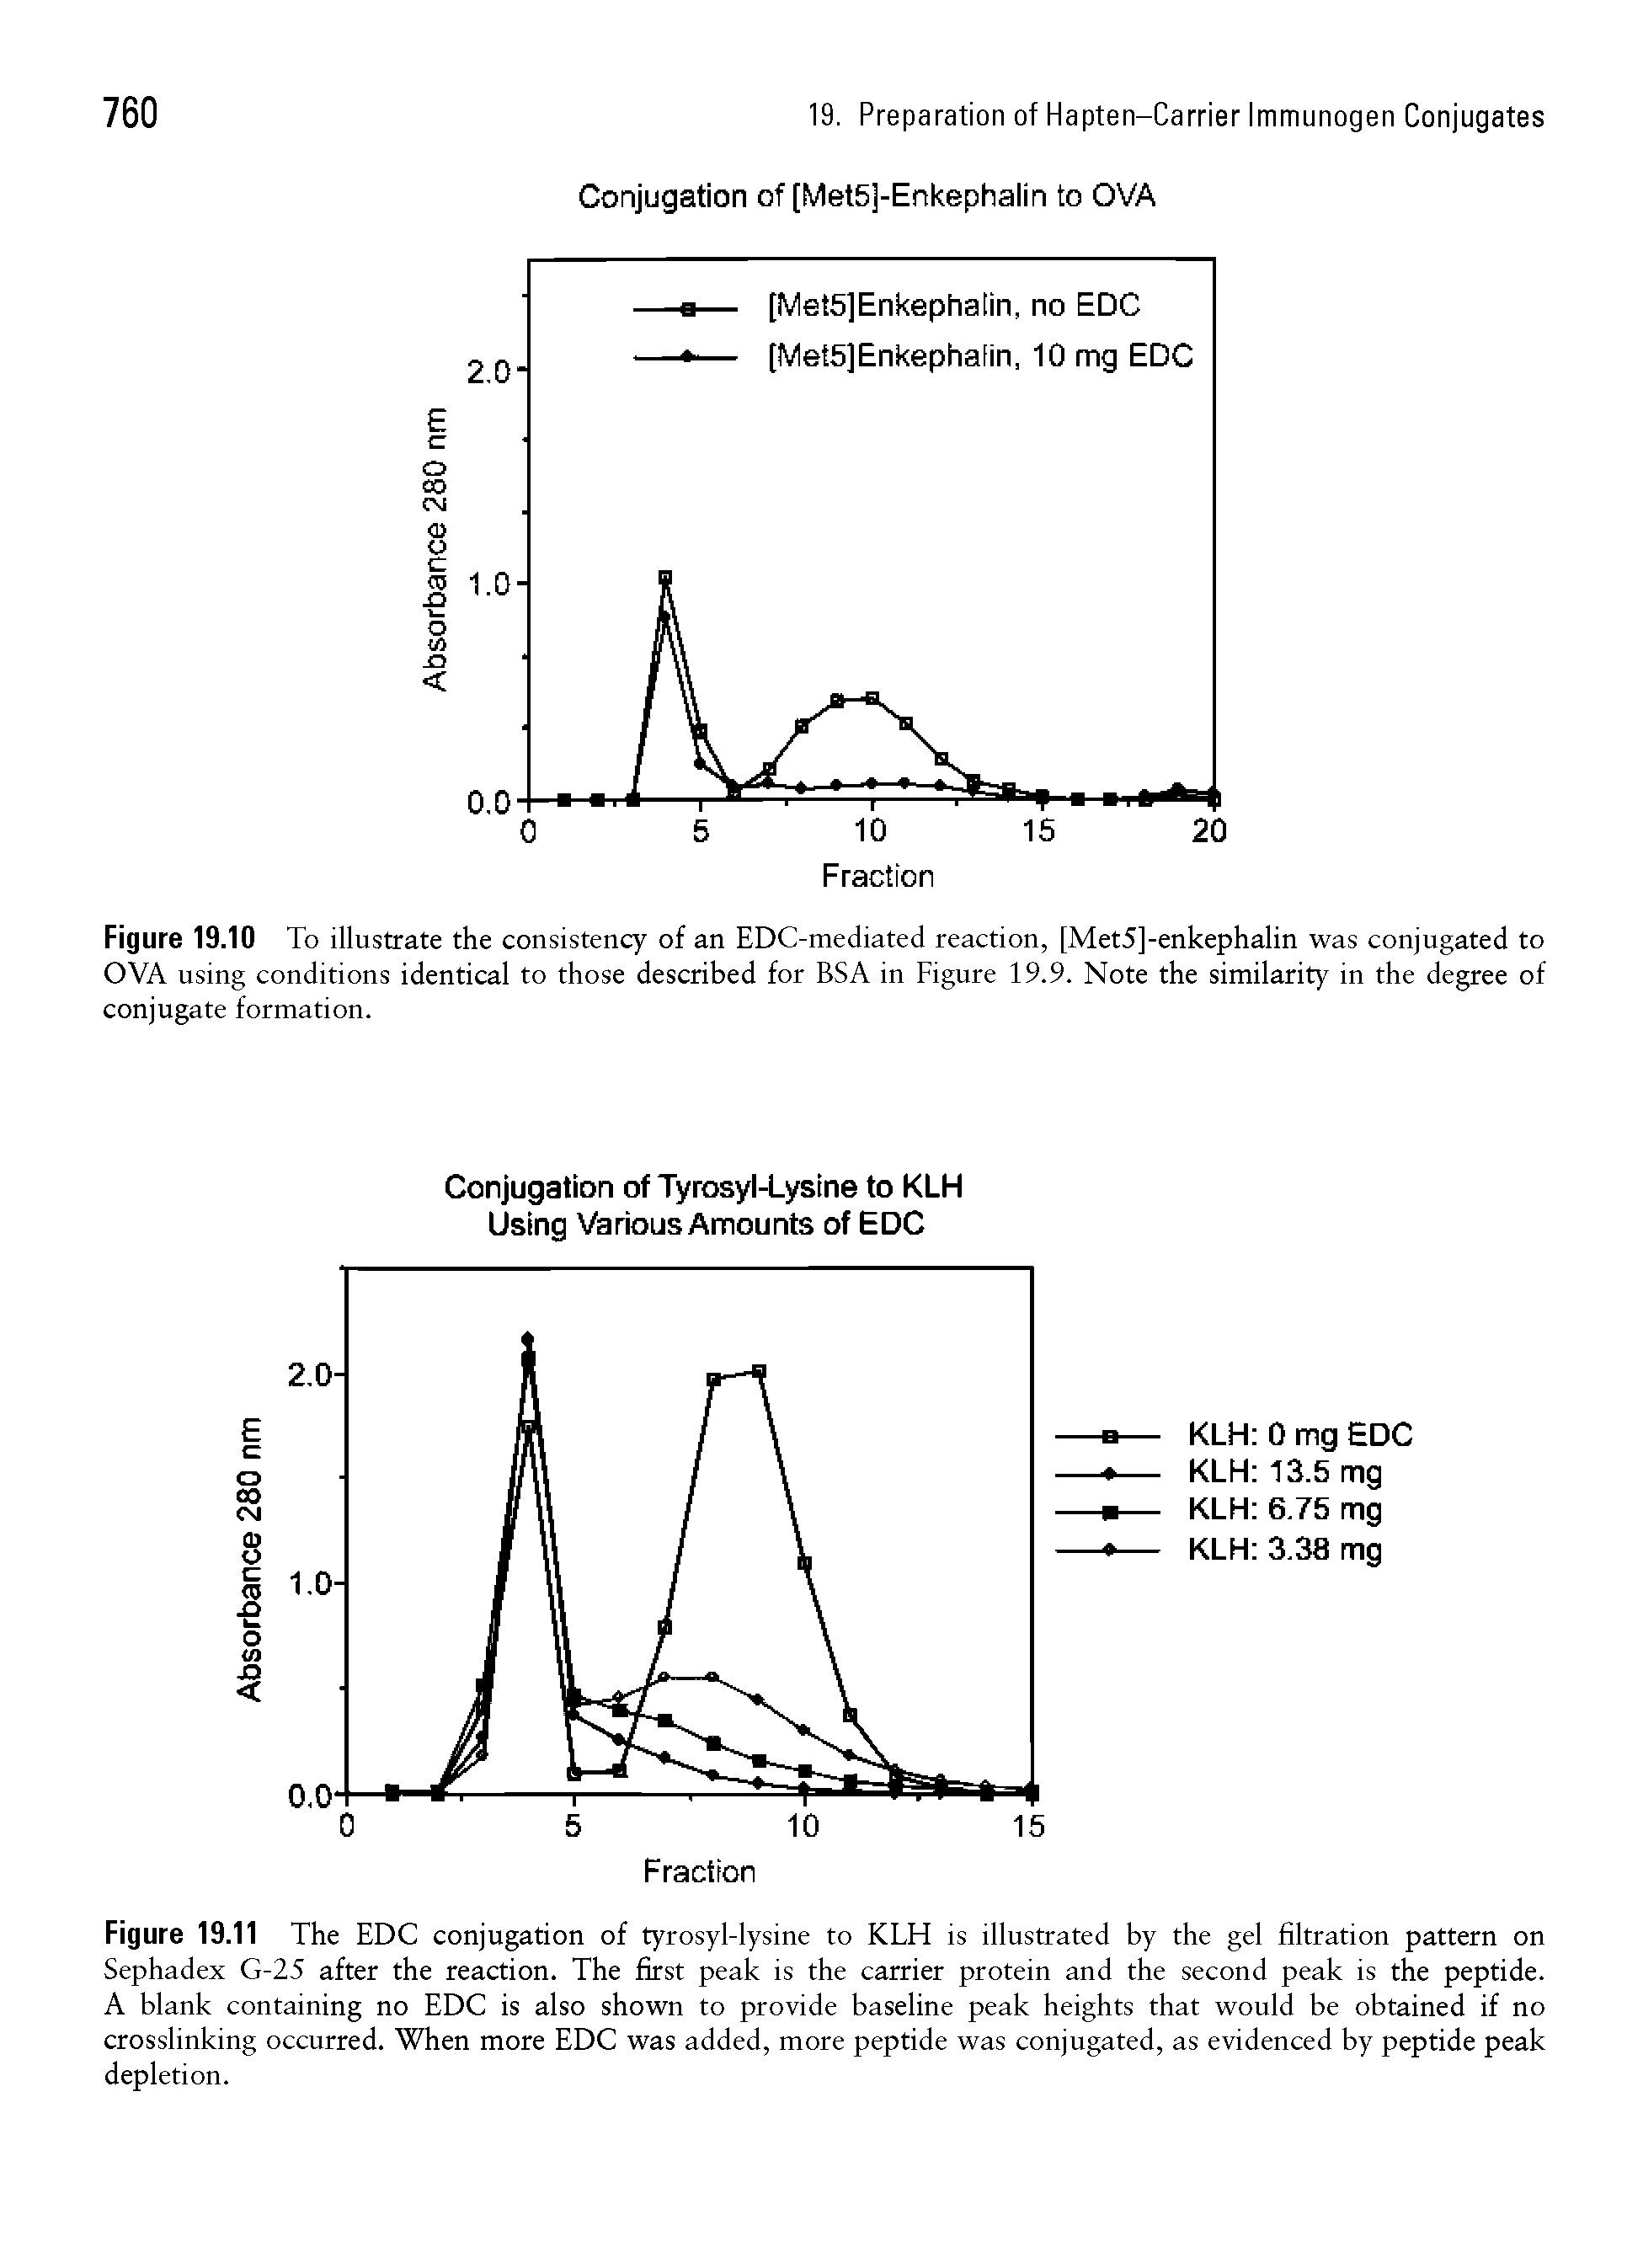 Figure 19.10 To illustrate the consistency of an EDC-mediated reaction, [Met5]-enkephalin was conjugated to OVA using conditions identical to those described for BSA in Figure 19.9. Note the similarity in the degree of conjugate formation.